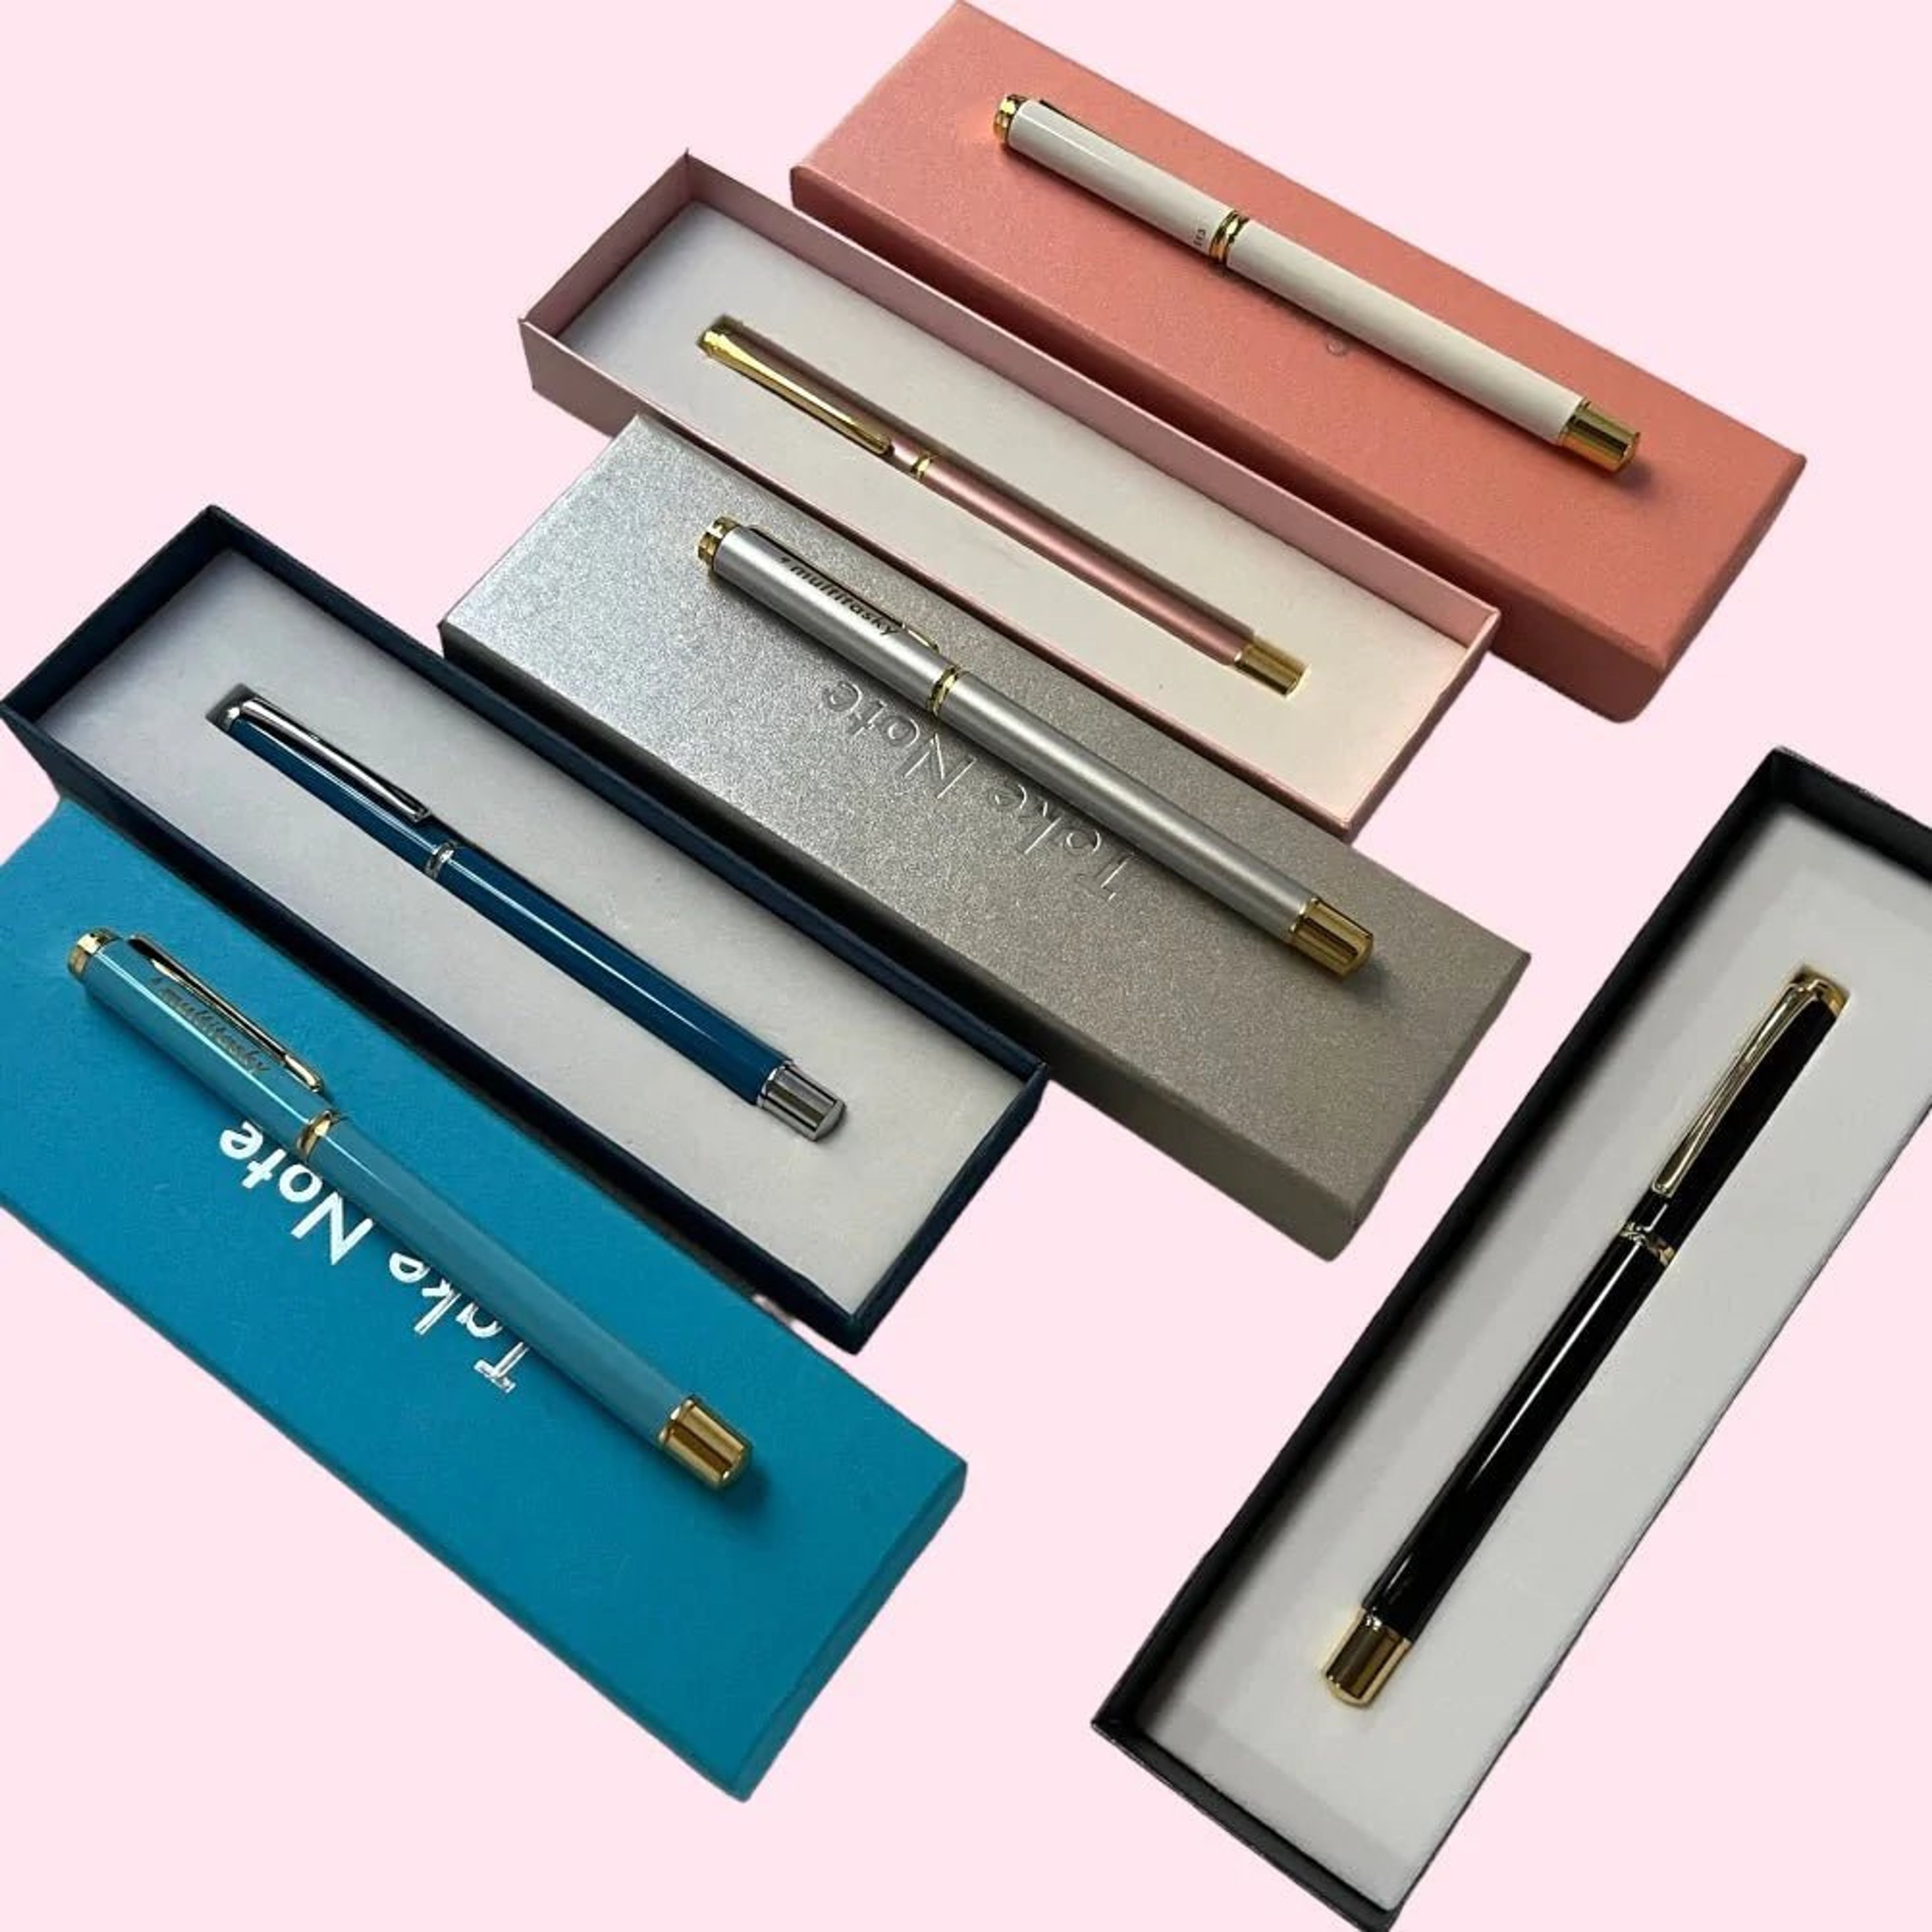 Feel-Good Writing Set (Notebook + Refill Pages + Deluxe Pen)